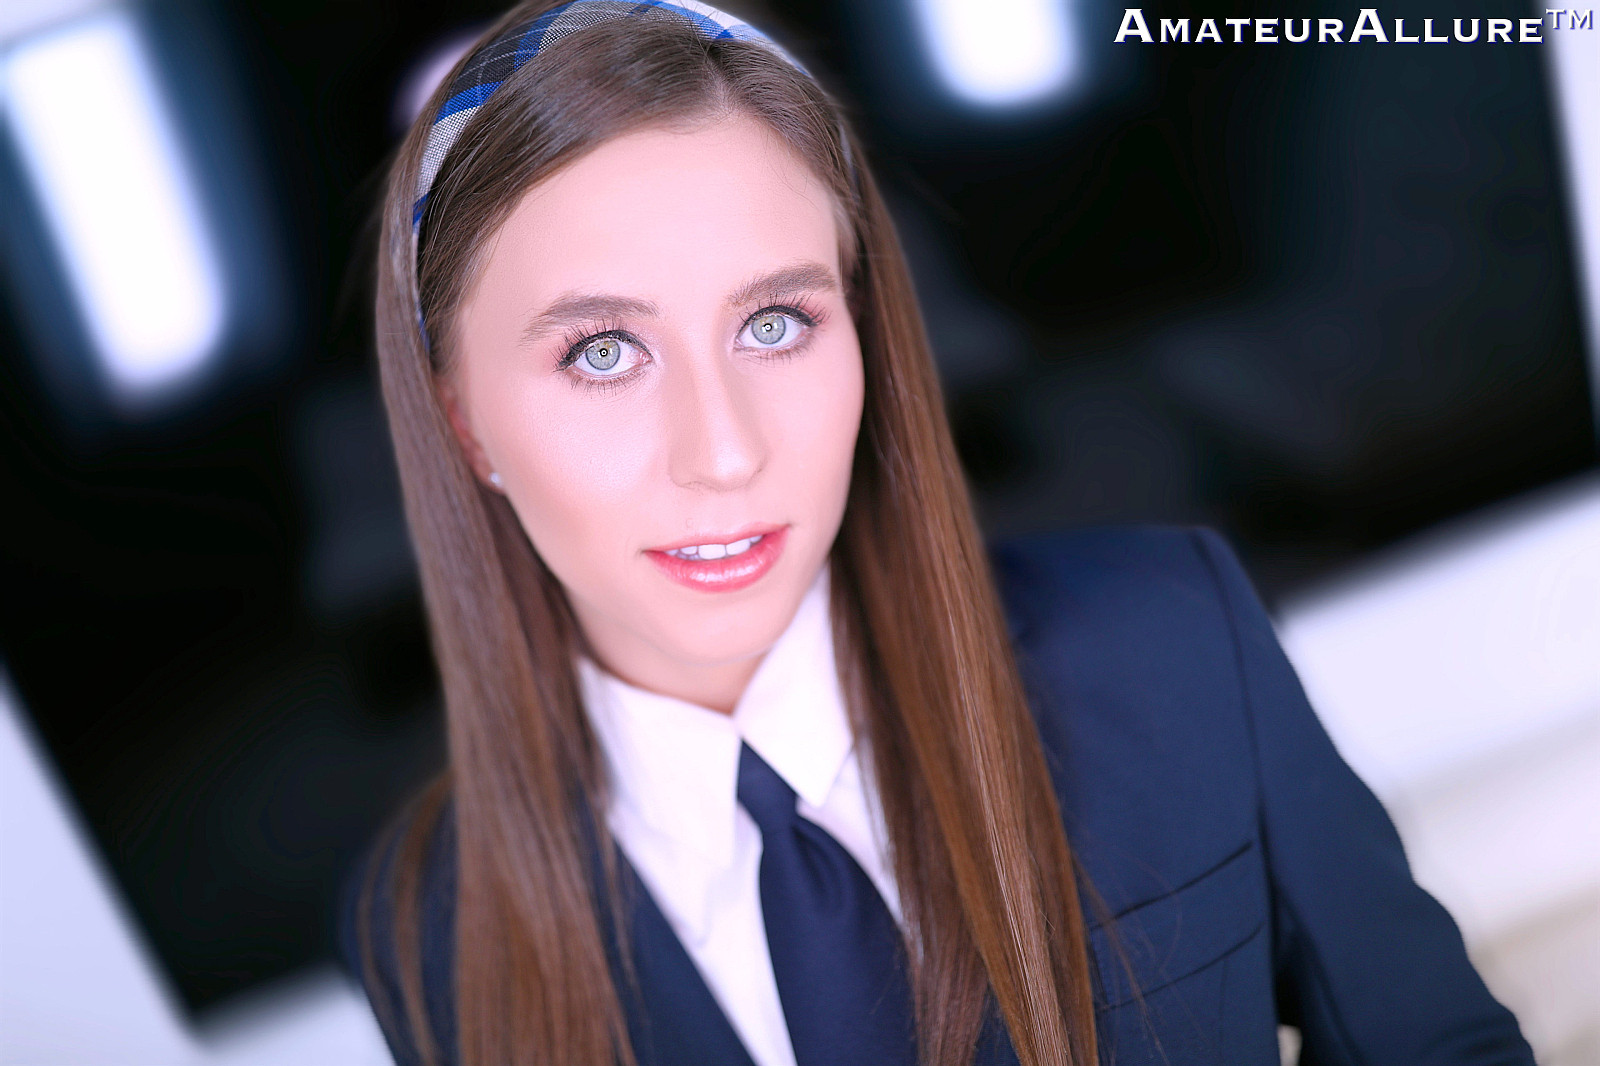 NEW VIDEO! Pretty Kourtney Rae is the new recruit at the Swallow Academy! Amateur Allure pic photo photo